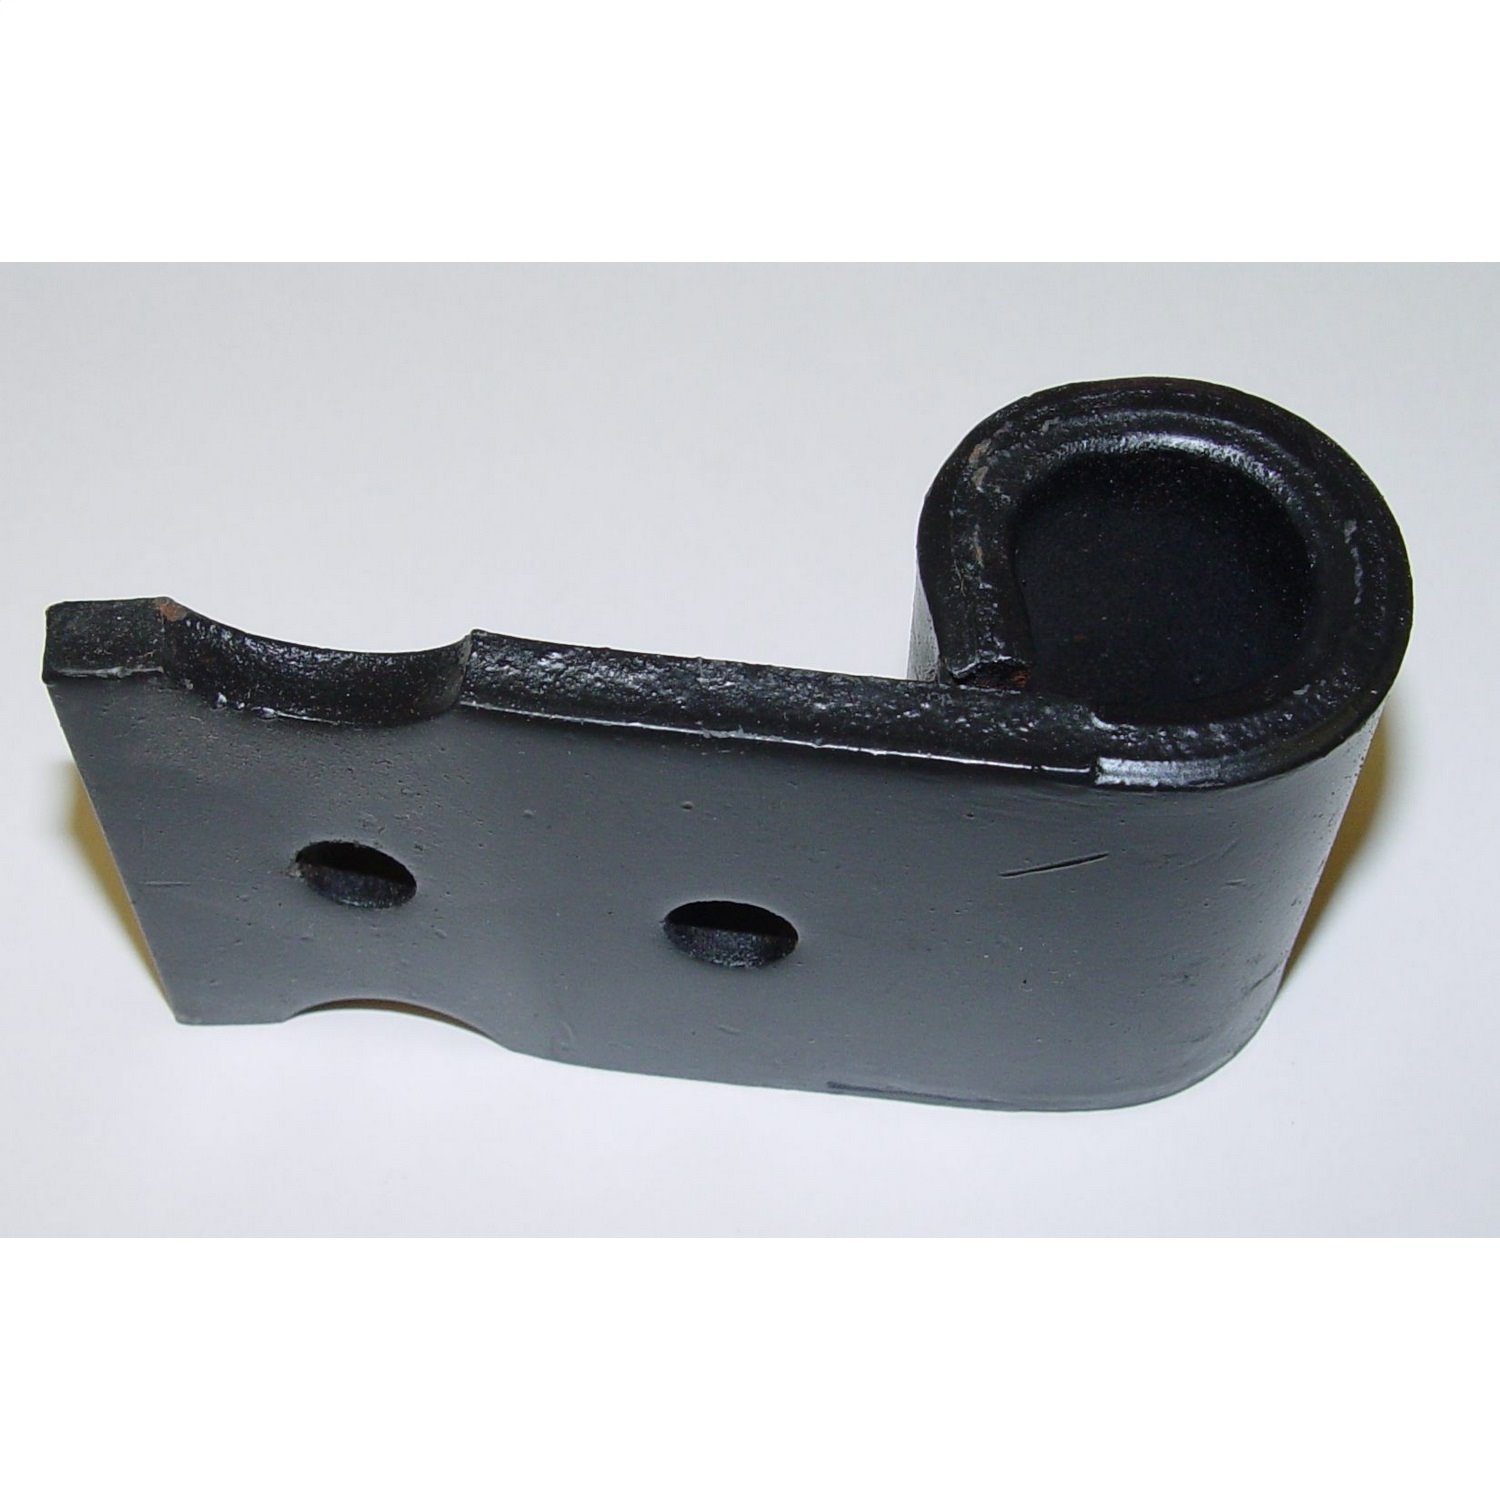 Stock replacement rear frame shackle hanger from Omix-ADA,